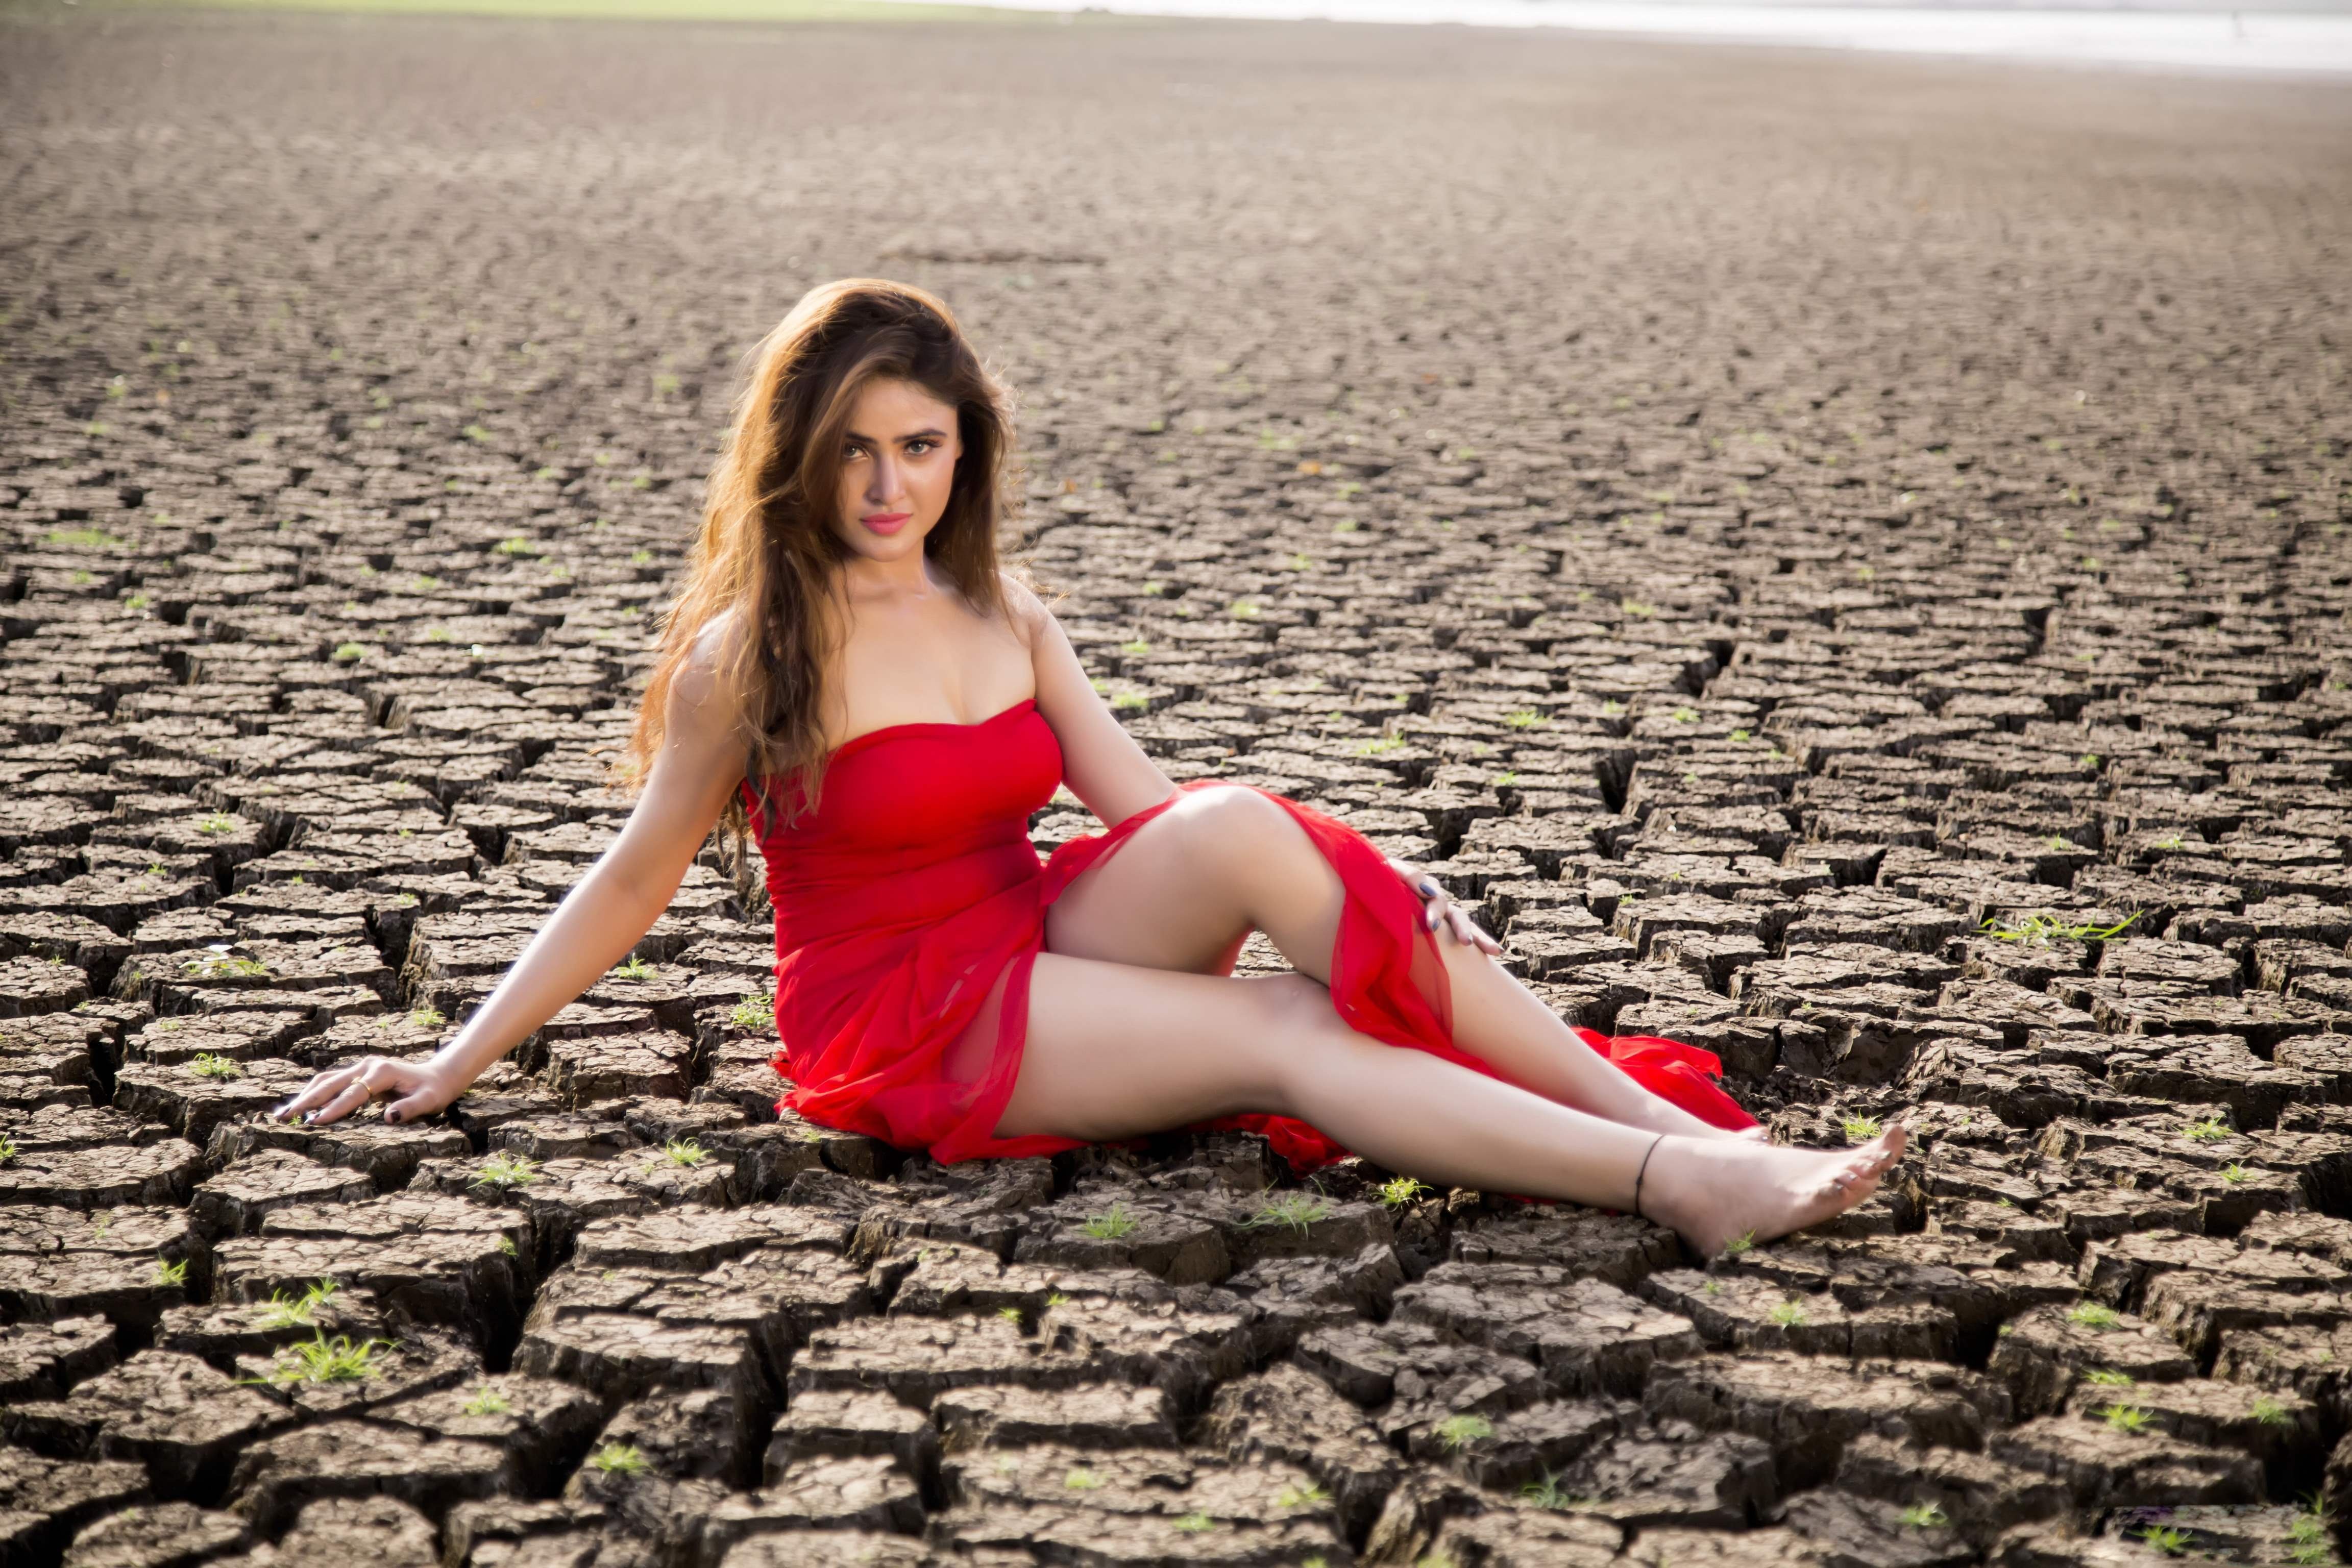 sony, Charista, Bollywood, Actress, Model, Girl, Beautiful, Brunette ...